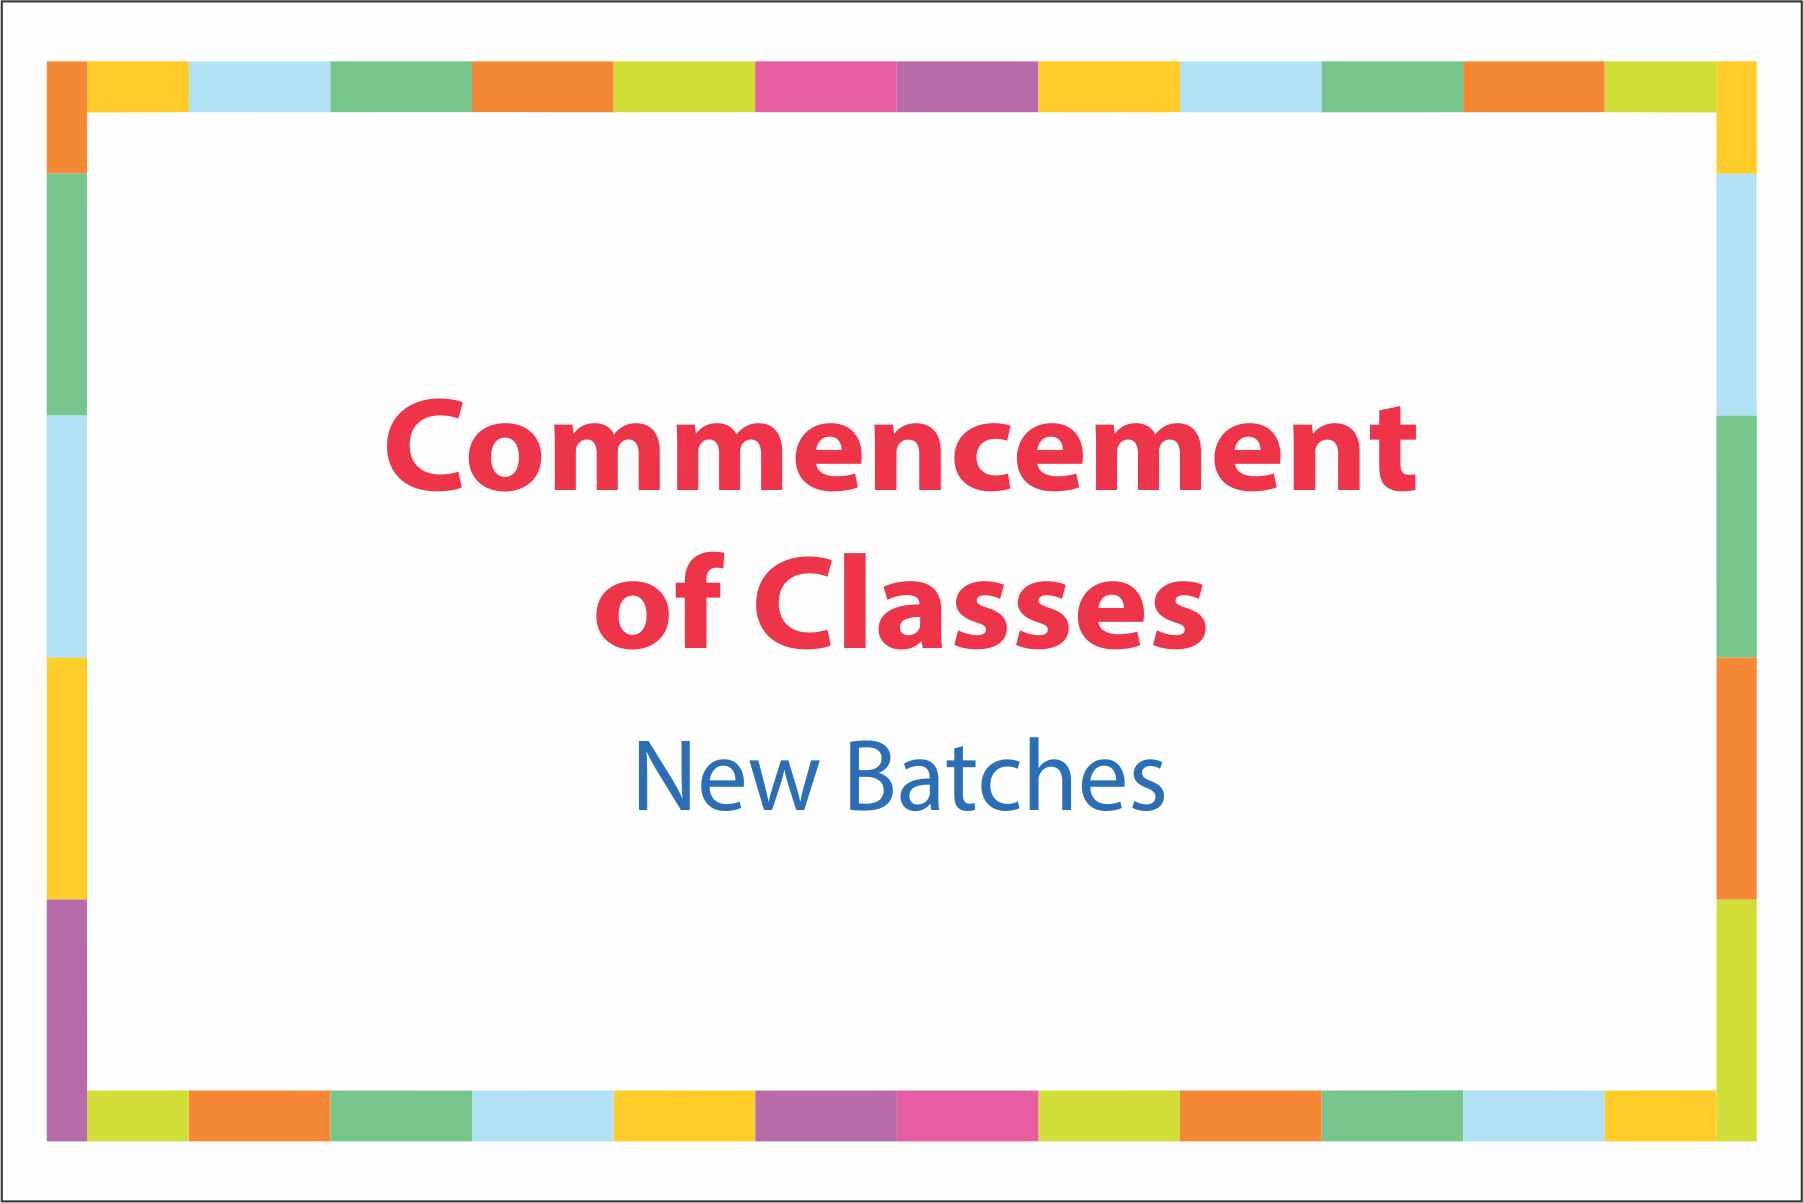 Spring 2023 Batch: Commencement of Classes